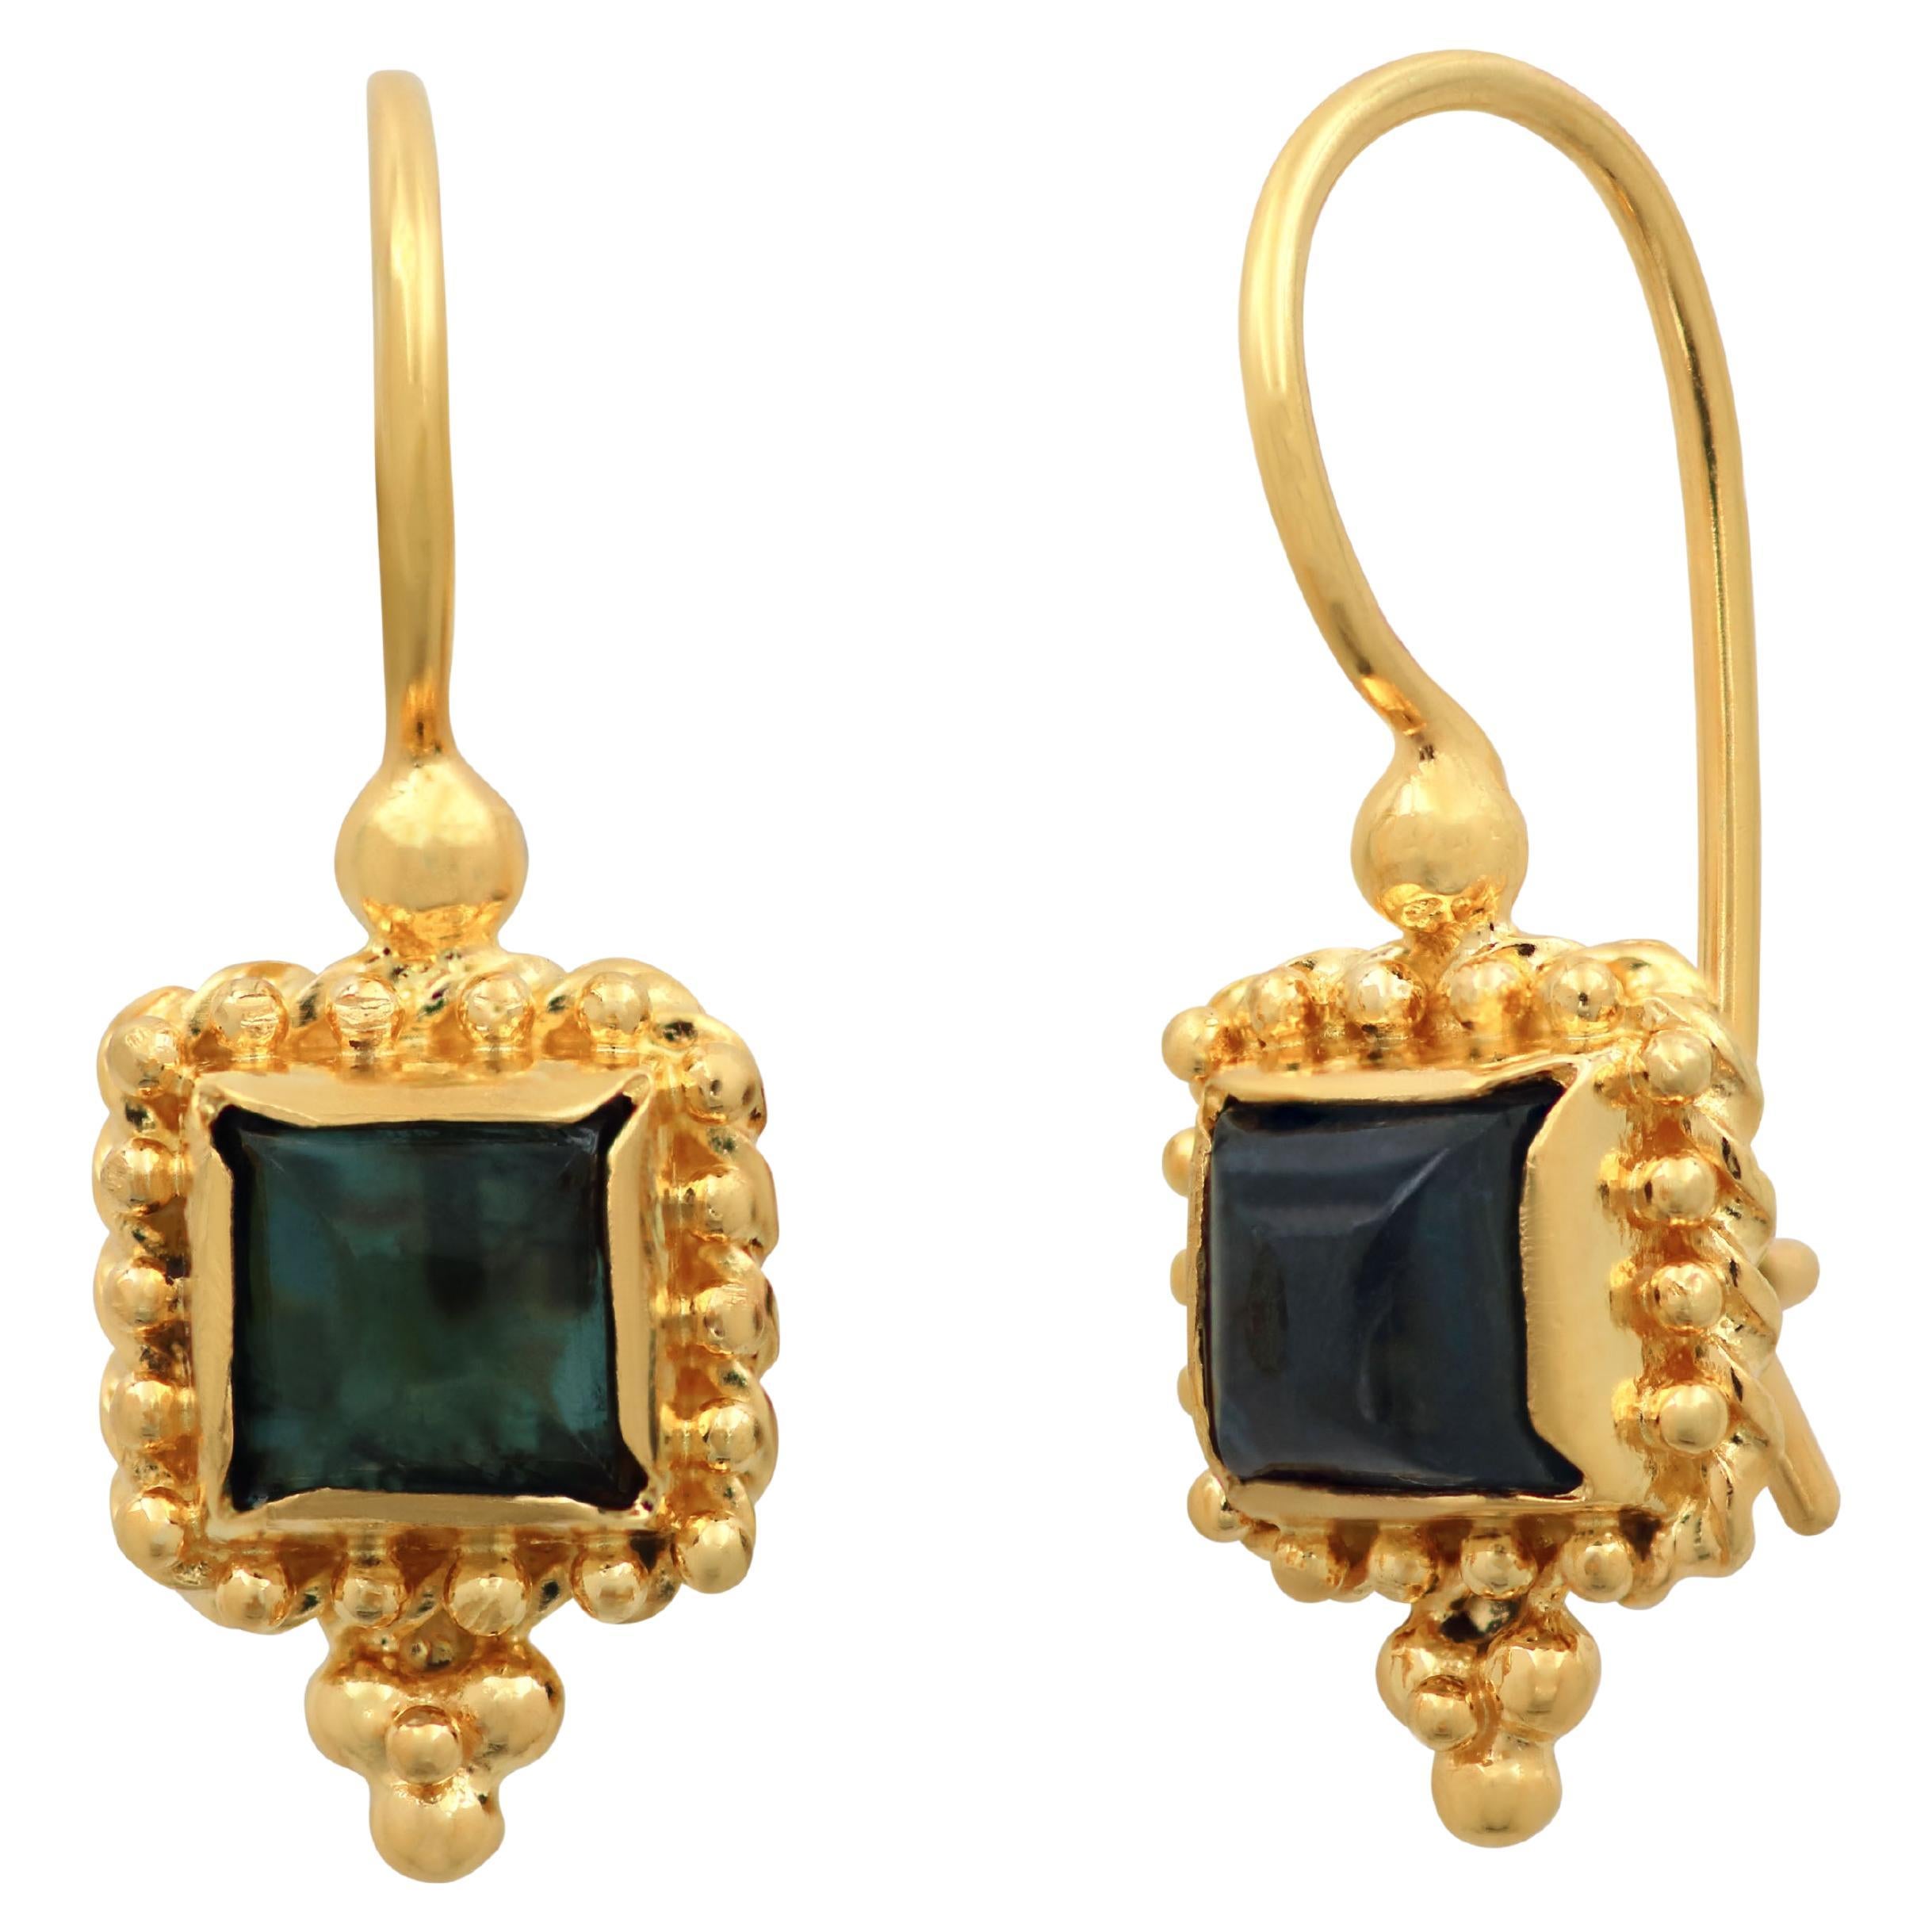 Dimos 18k Yellow Gold Filigree Earrings with Tourmaline